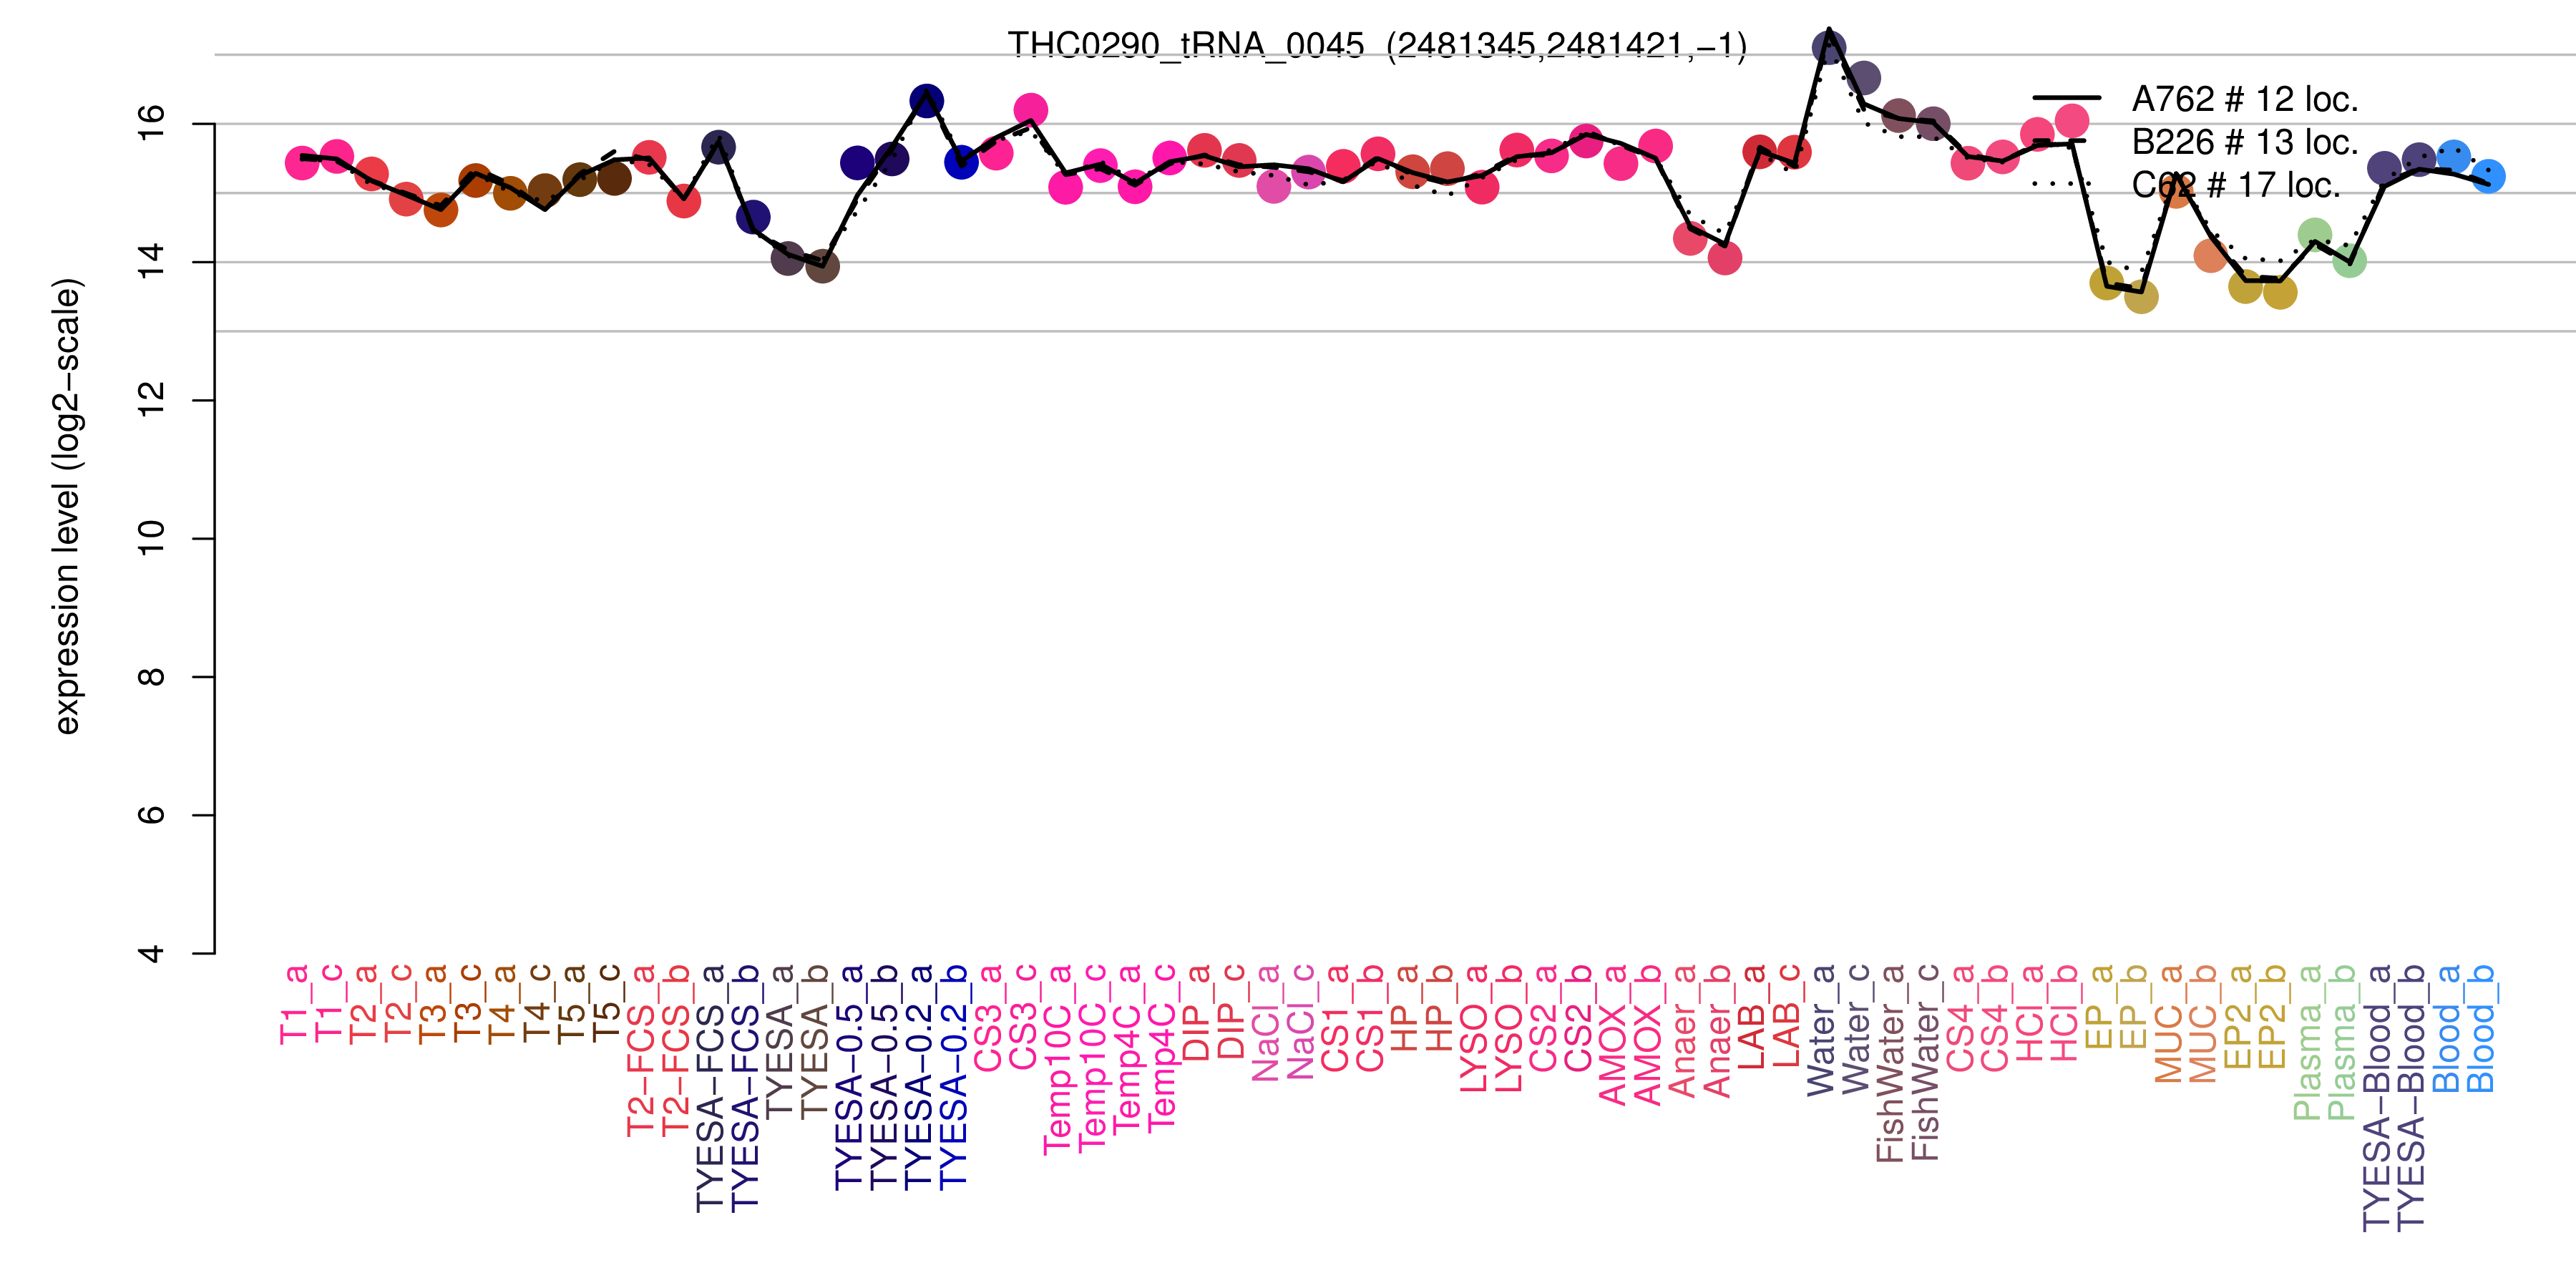 THC0290_tRNA_0045 expression levels among conditions